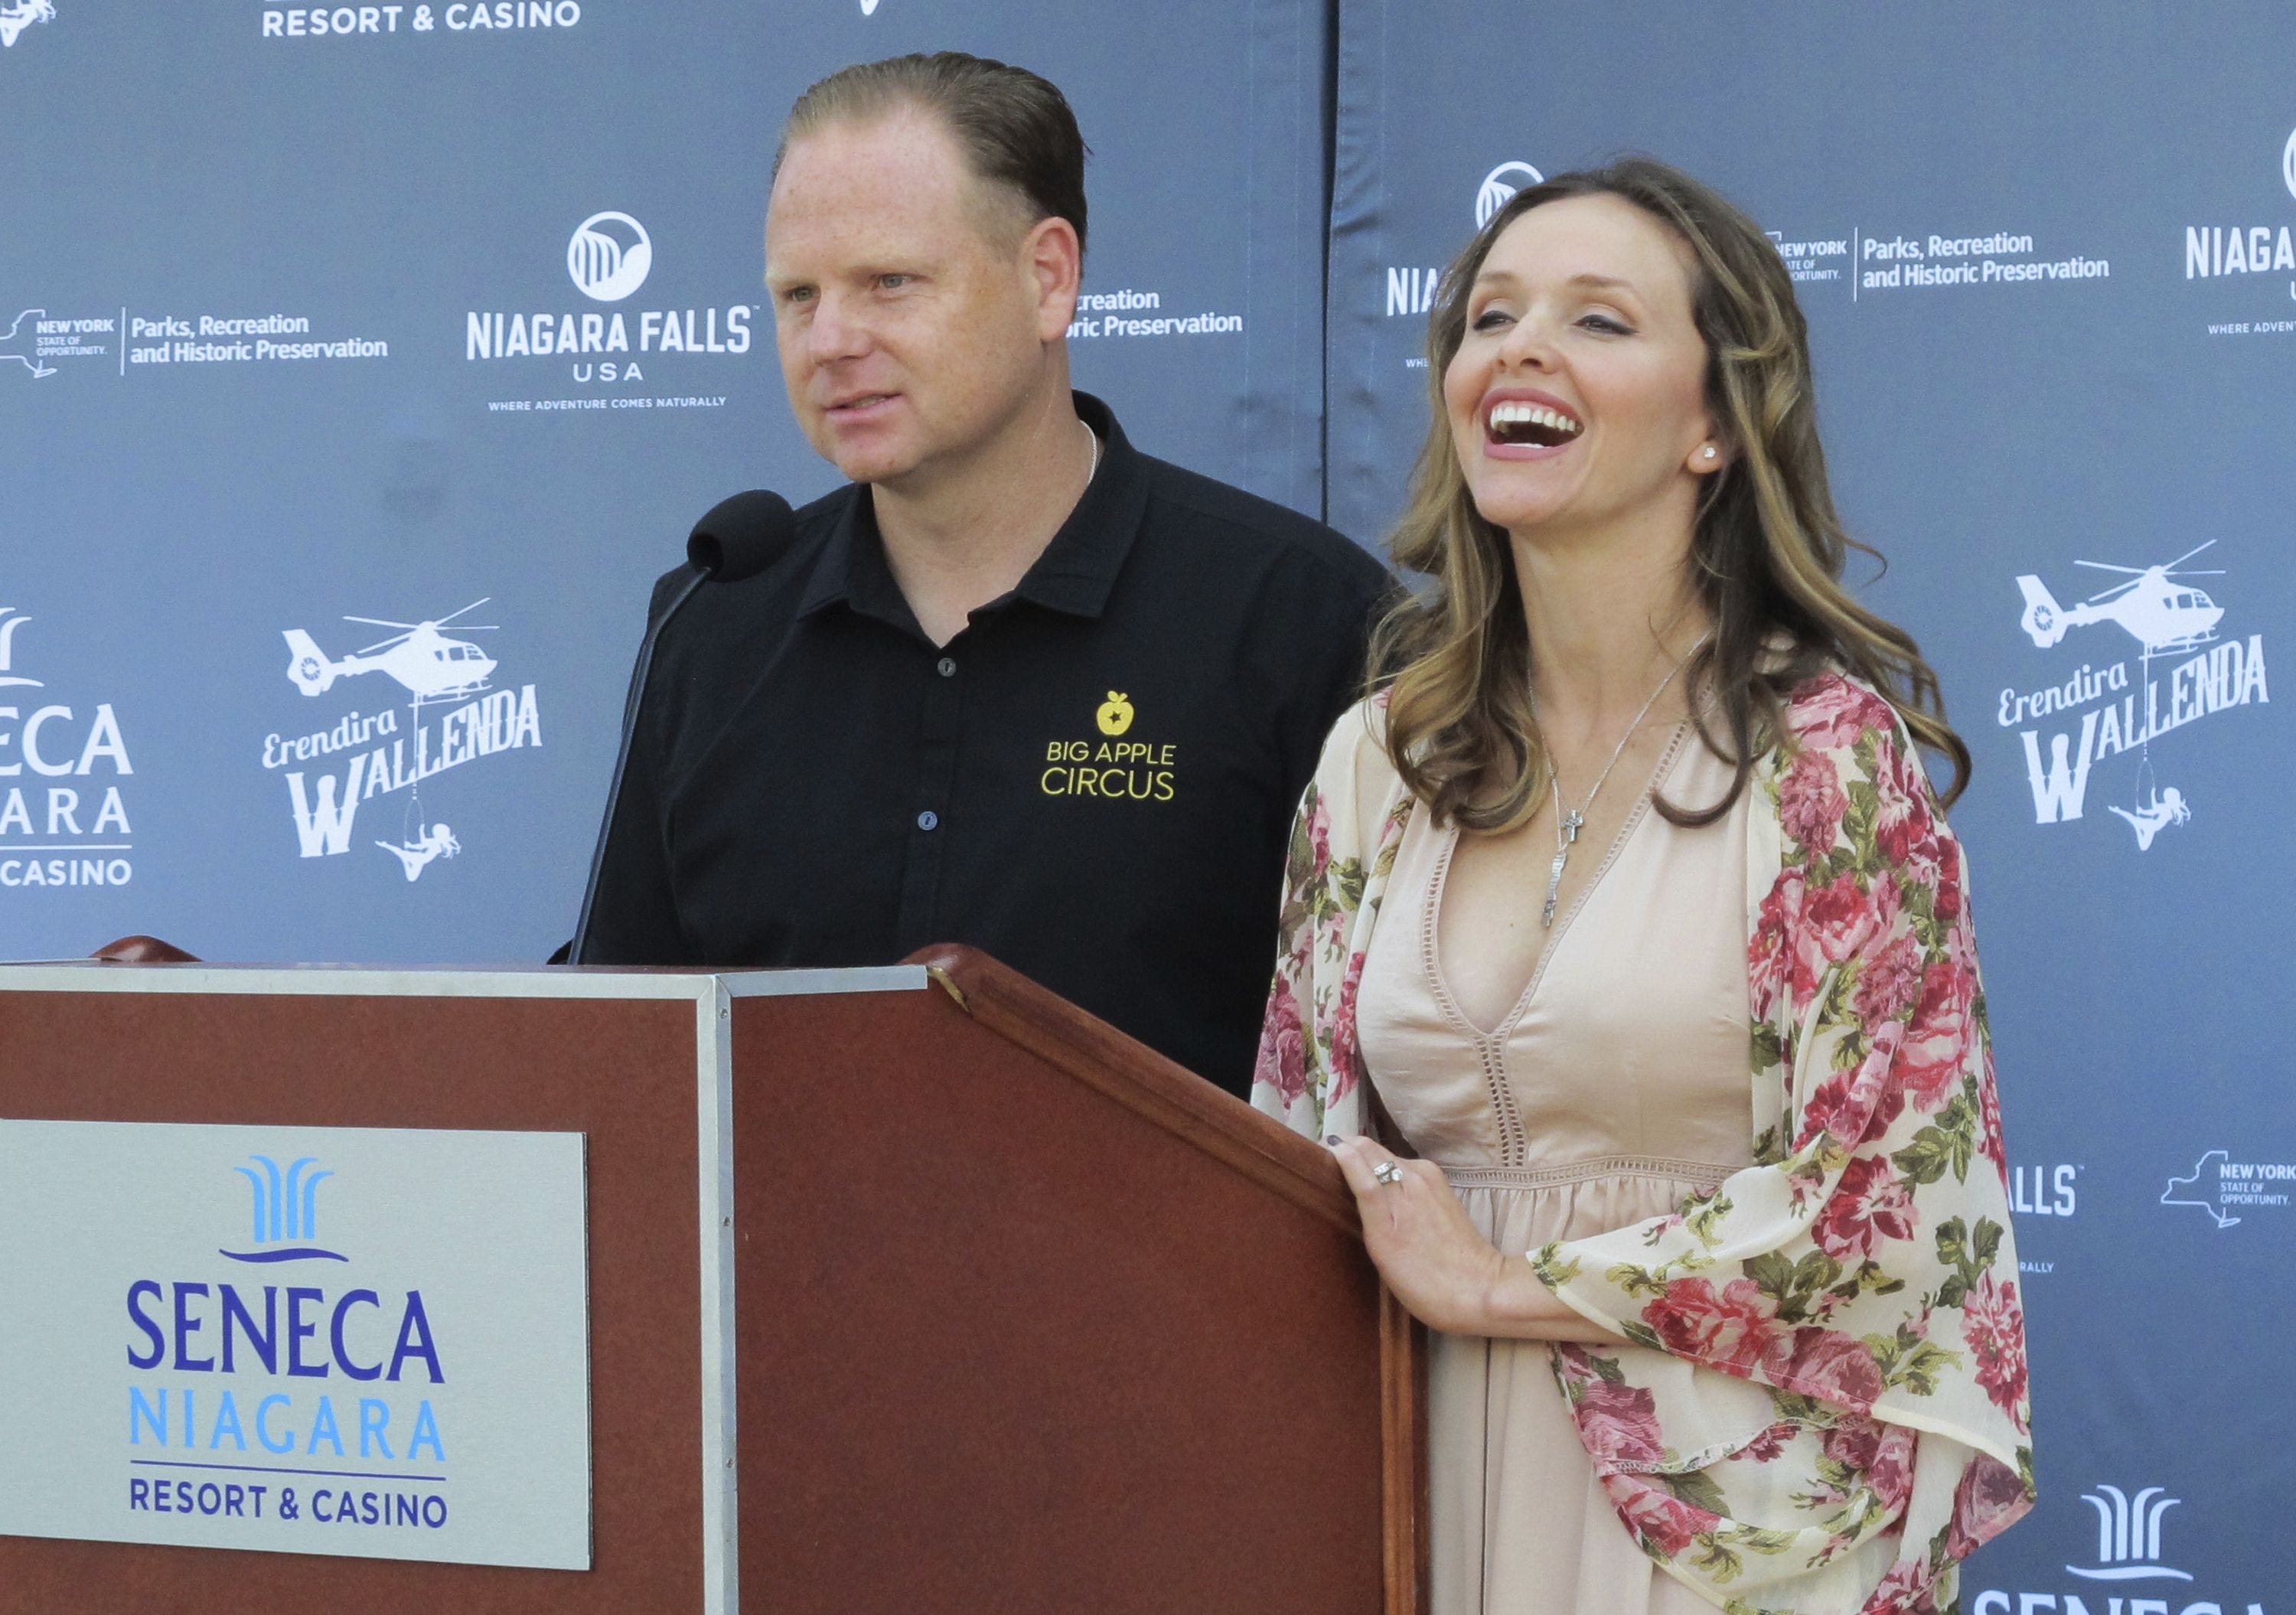 Nik Wallenda's wife hangs by her teeth from helicopter over Niagara Falls